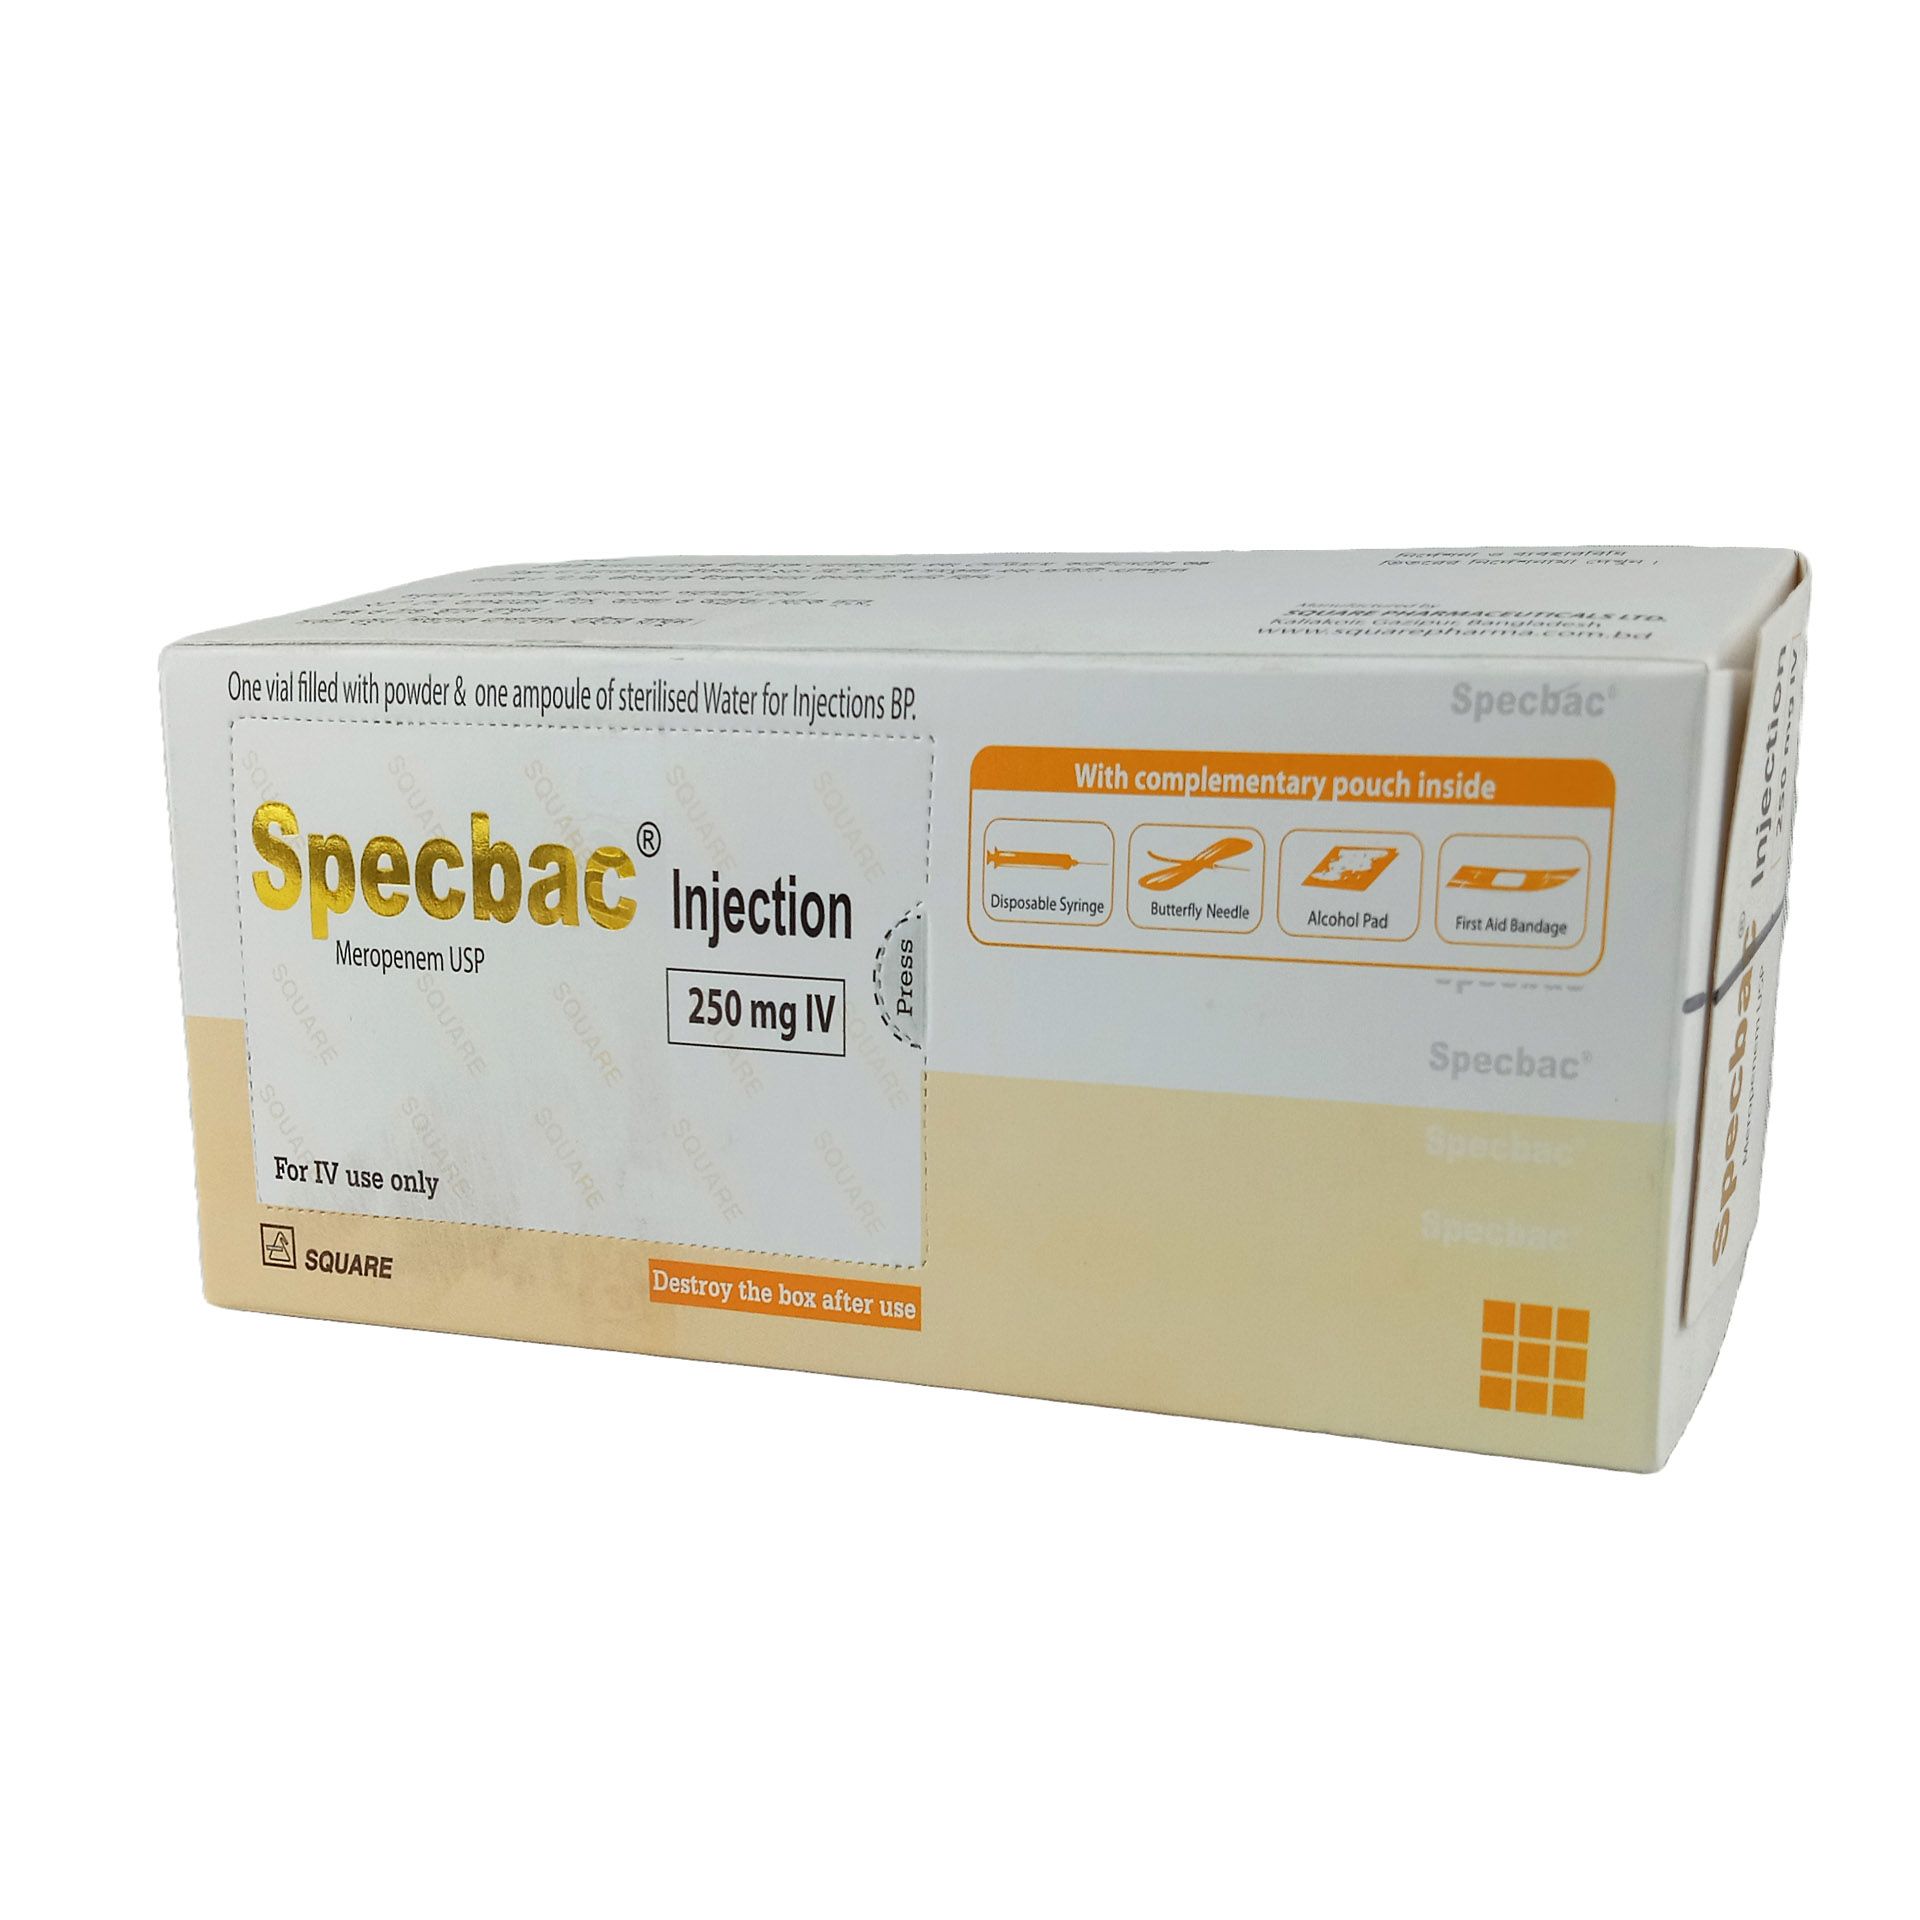 Specbac 250mg/vial Injection